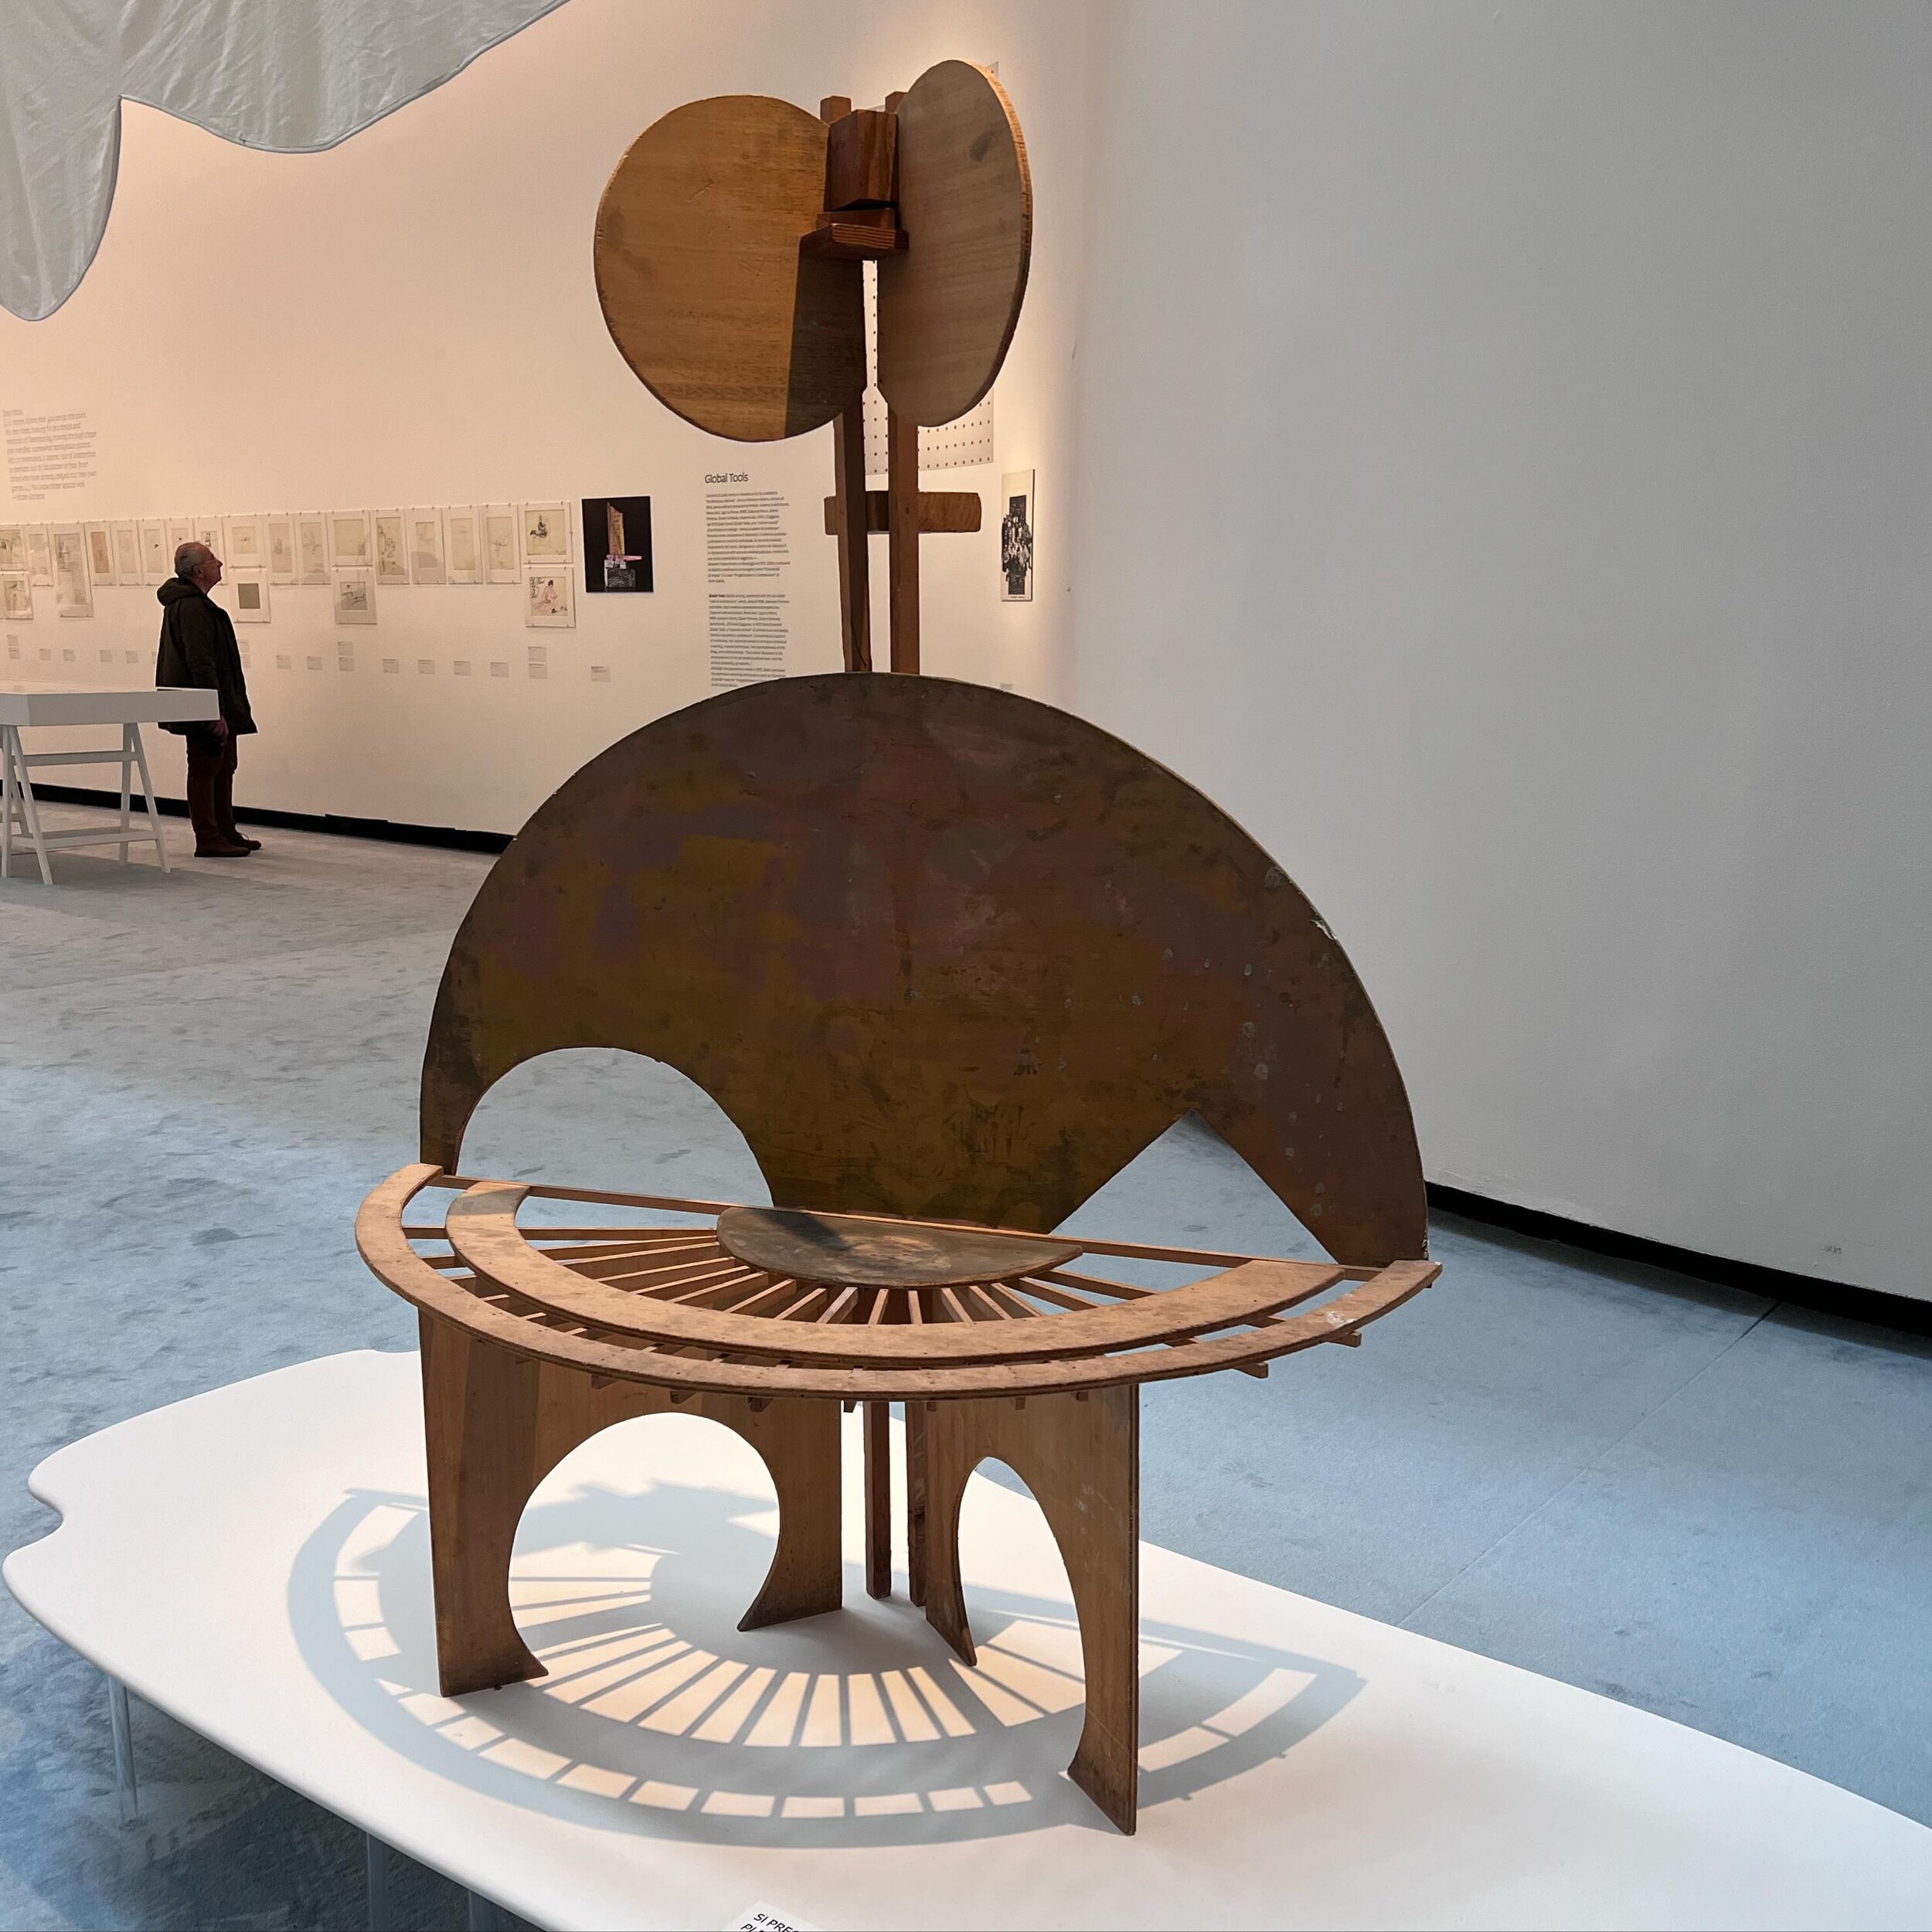 Only one example of the delightful brilliance of Riccardo Dalisi. Above a bench made of wood. From what I understand with my broken Italian it might be a model in which he even thought of the shadows it would deliver. He was utterly pioneering with h